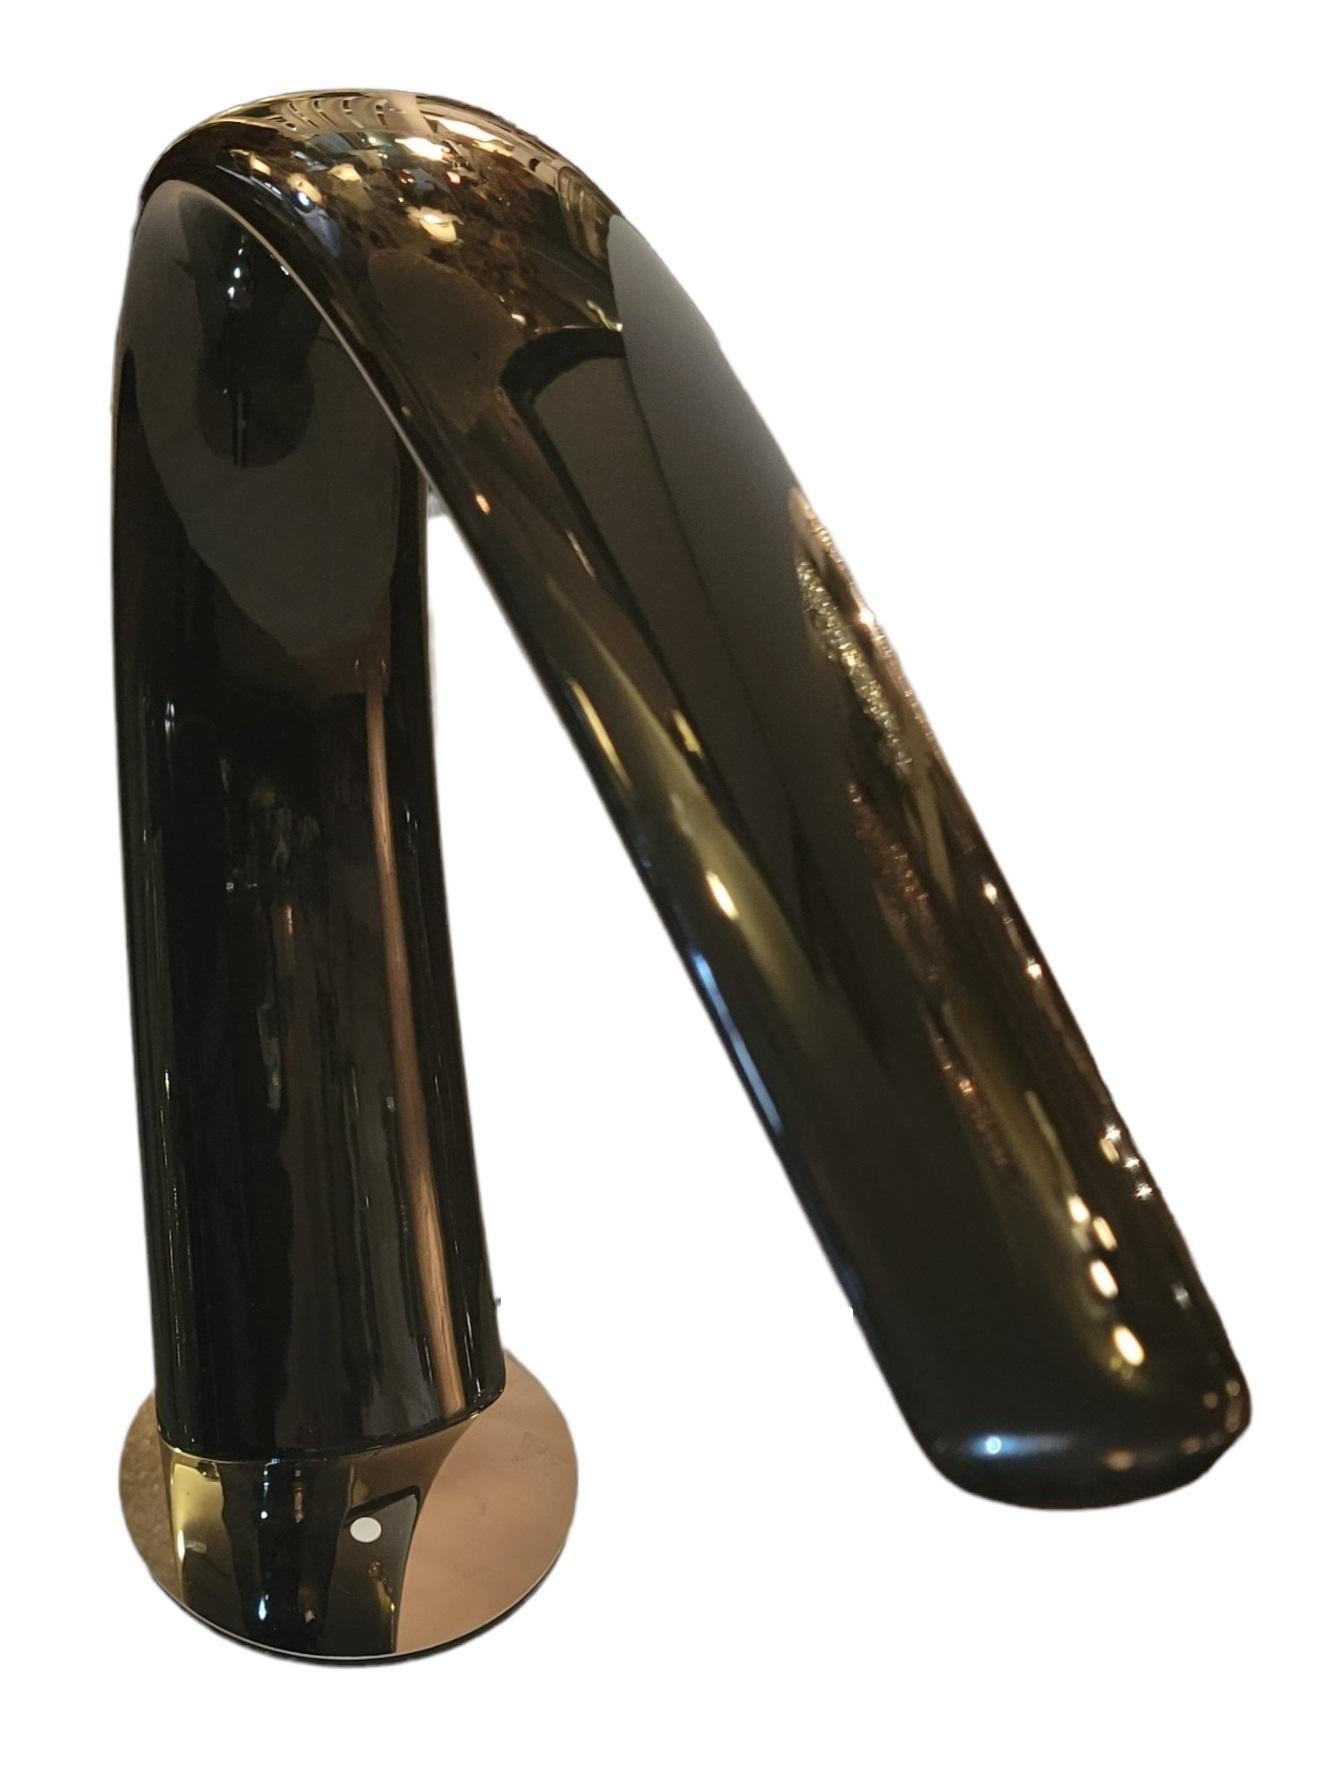 Italian Cattelan Lacquered Arm Table Lamp In Good Condition For Sale In Pasadena, CA